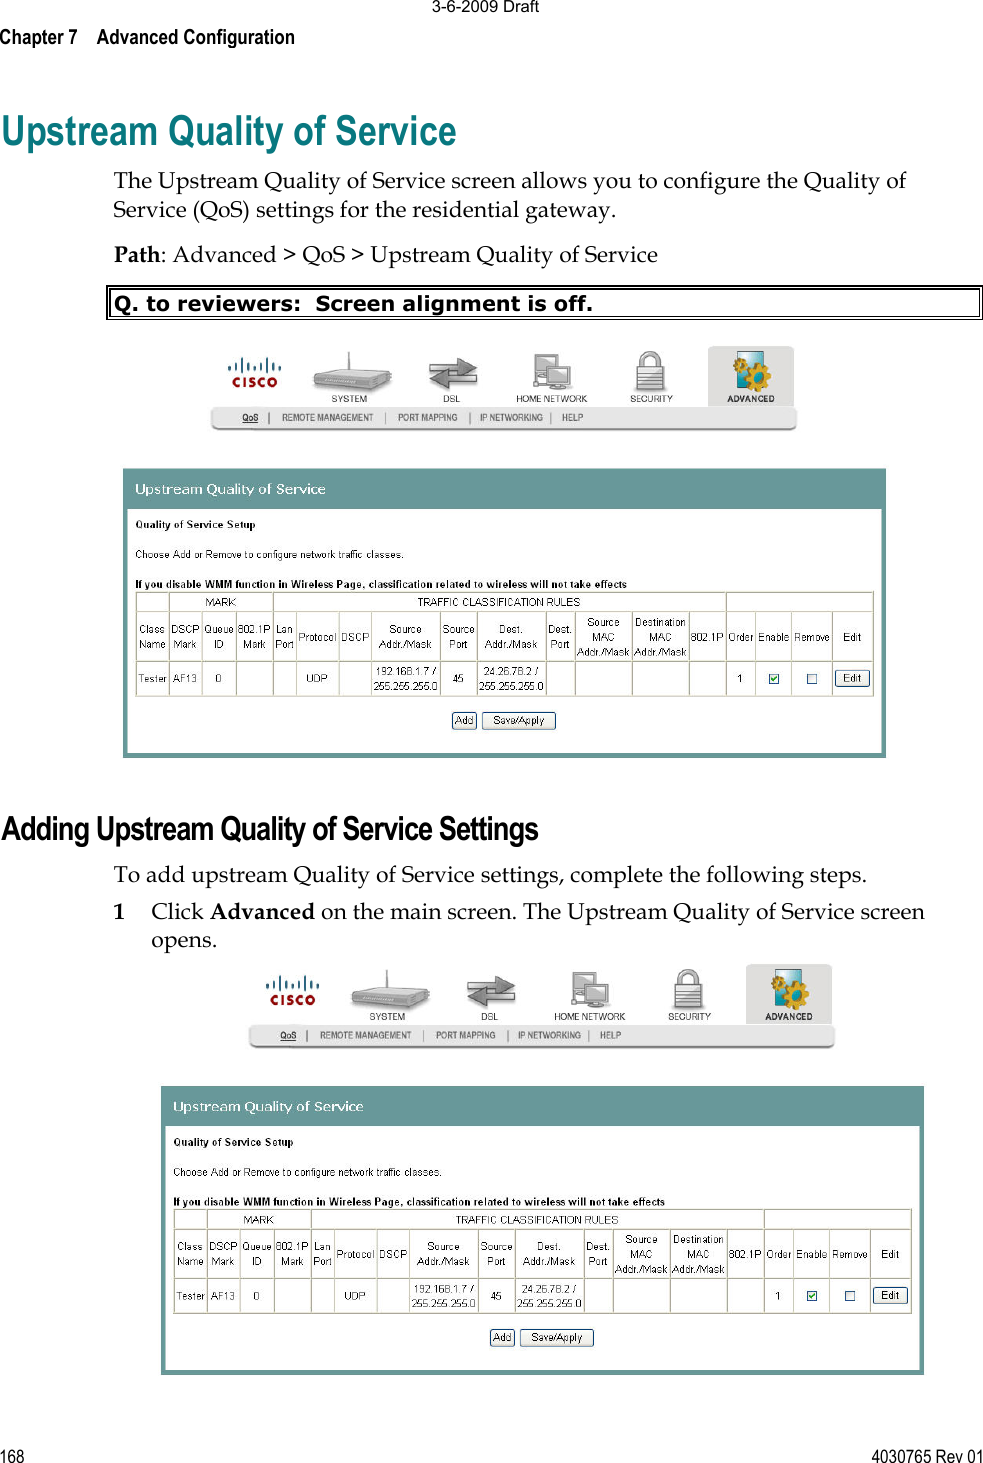 Chapter 7    Advanced Configuration 168 4030765 Rev 01Upstream Quality of Service The Upstream Quality of Service screen allows you to configure the Quality of Service (QoS) settings for the residential gateway.  Path: Advanced &gt; QoS &gt; Upstream Quality of Service Q. to reviewers:  Screen alignment is off. Adding Upstream Quality of Service Settings To add upstream Quality of Service settings, complete the following steps. 1Click Advanced on the main screen. The Upstream Quality of Service screen opens. 3-6-2009 Draft